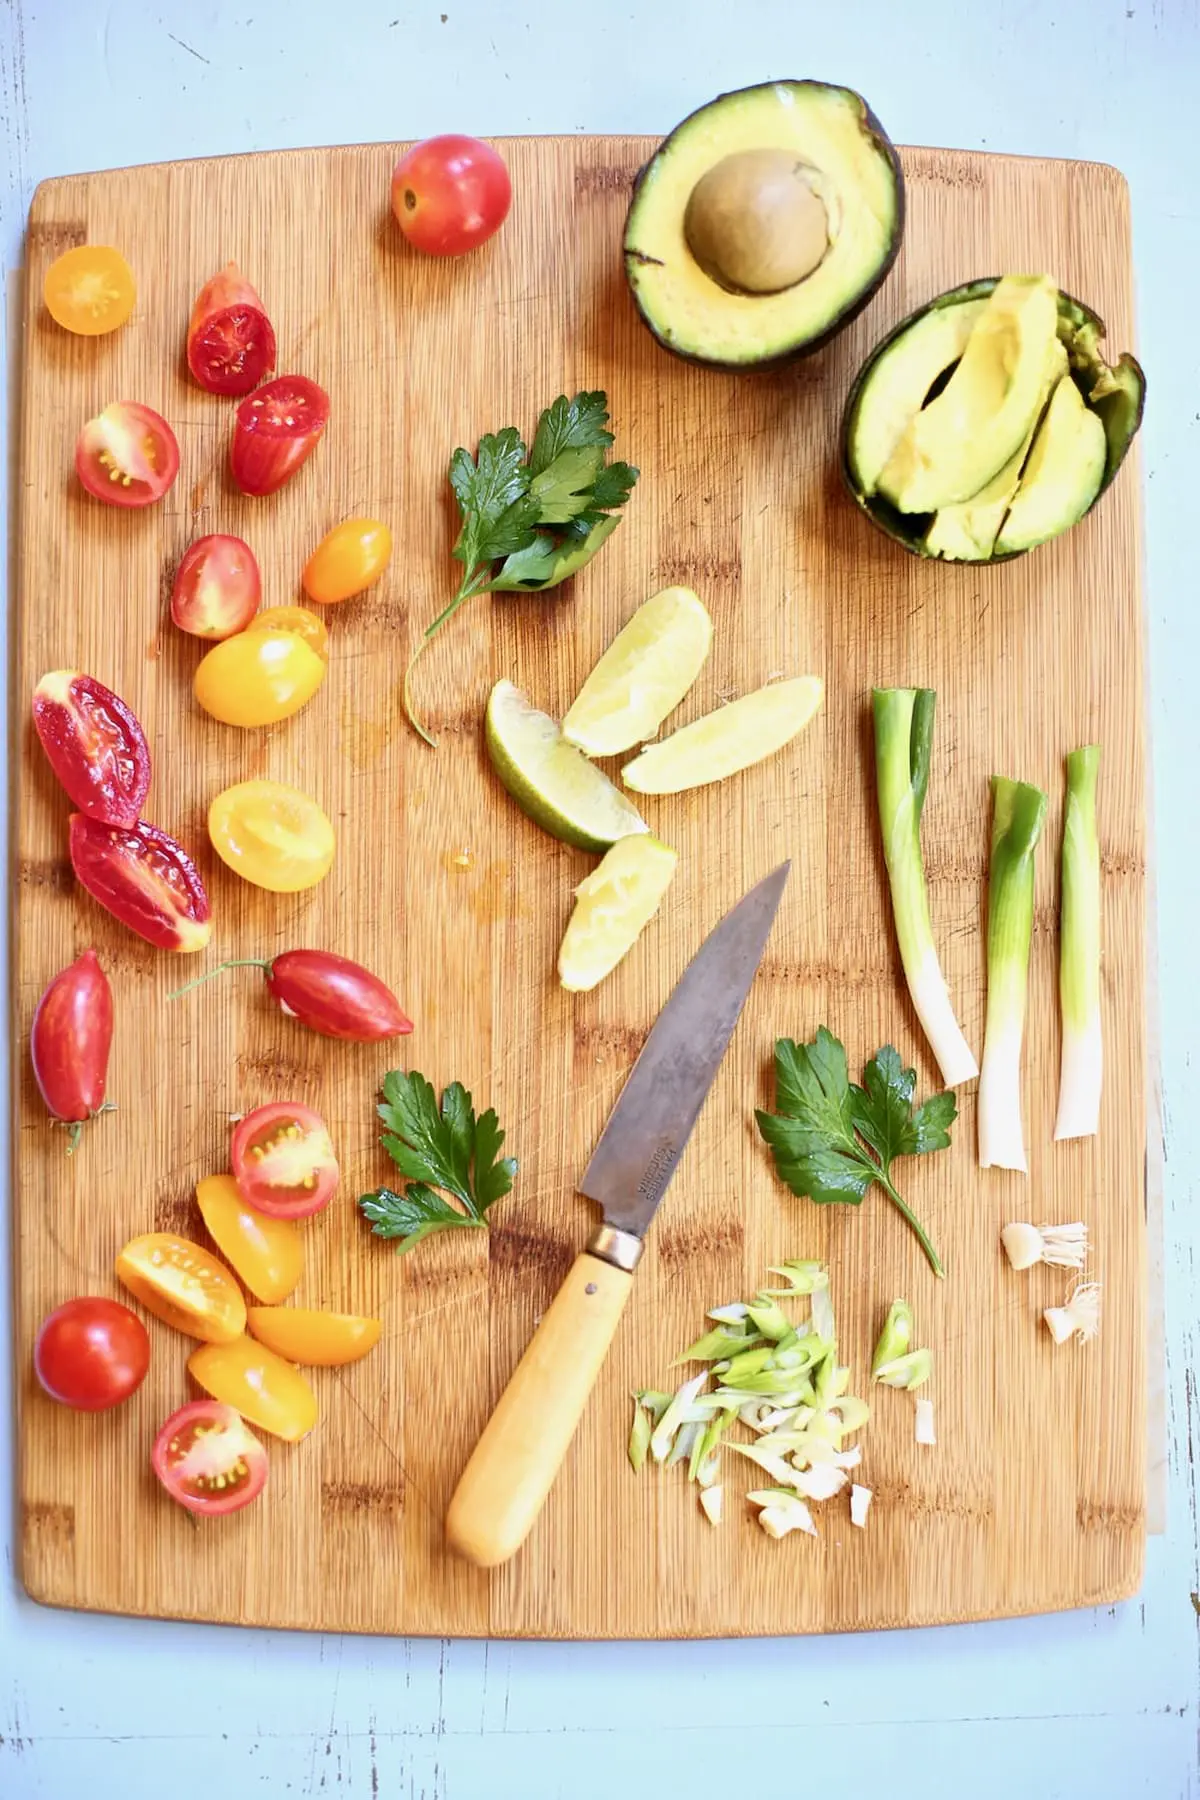 A cutting board of cut vegetables and a wooden knife